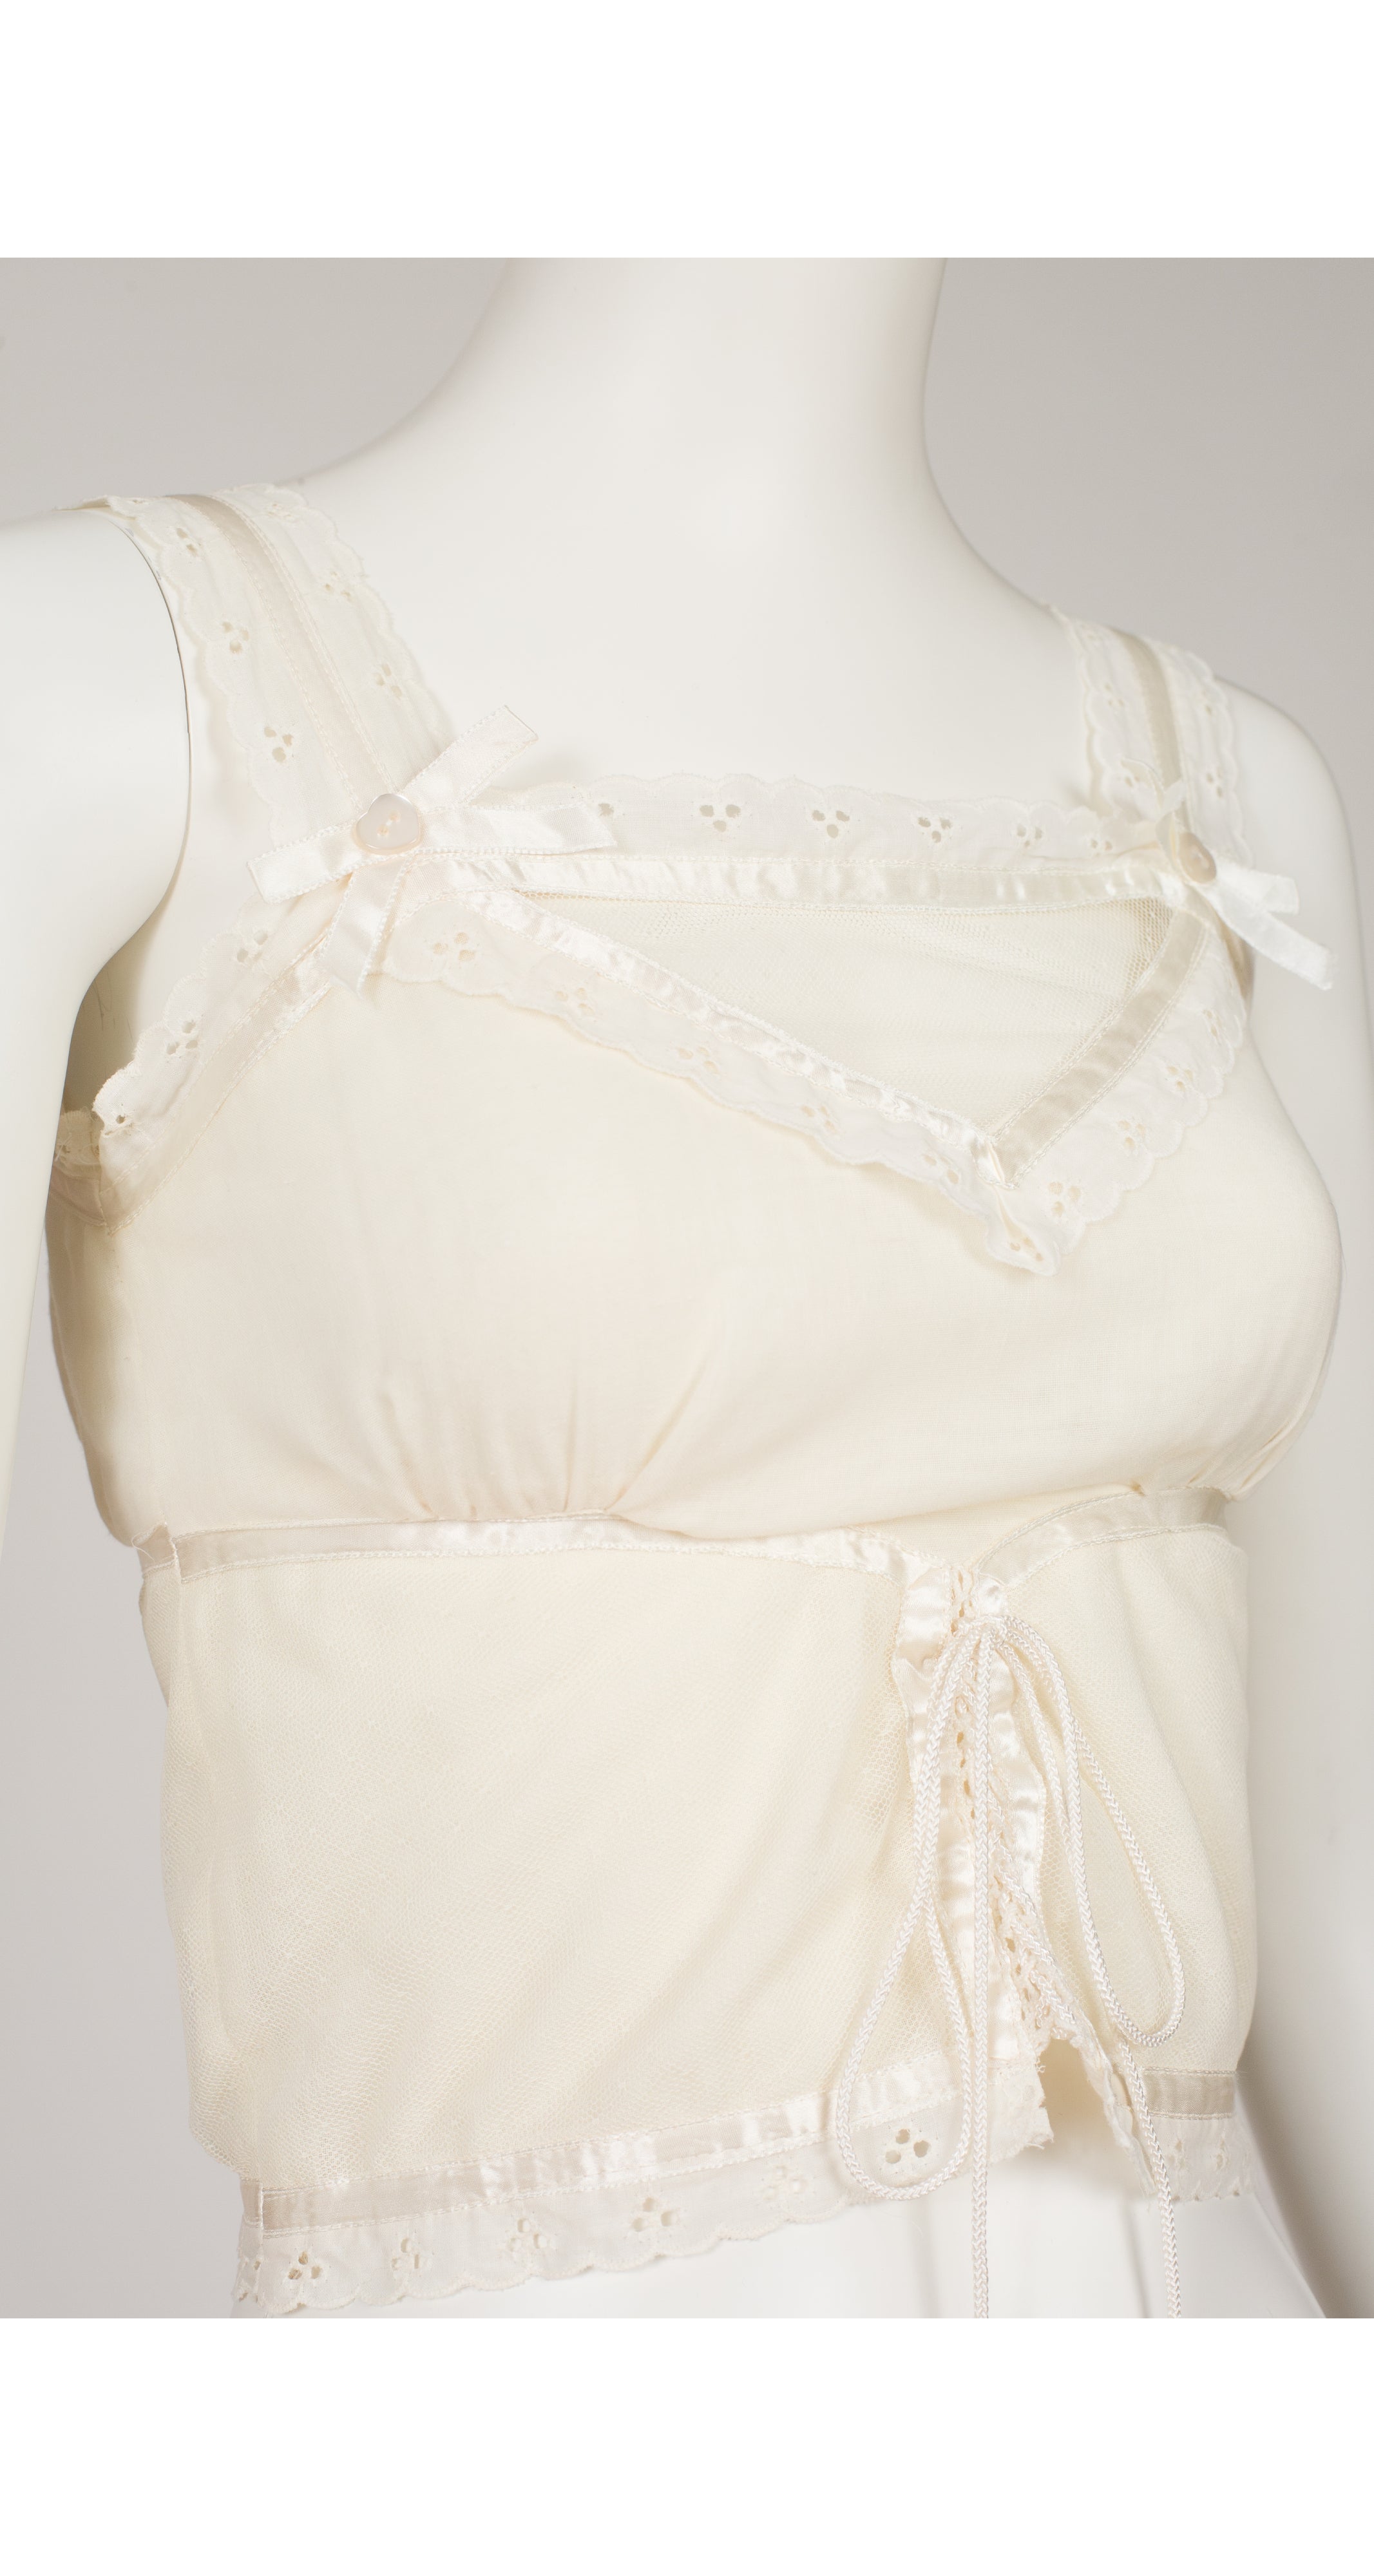 1970s Cream Cotton Lace-up Sleeveless Crop Top